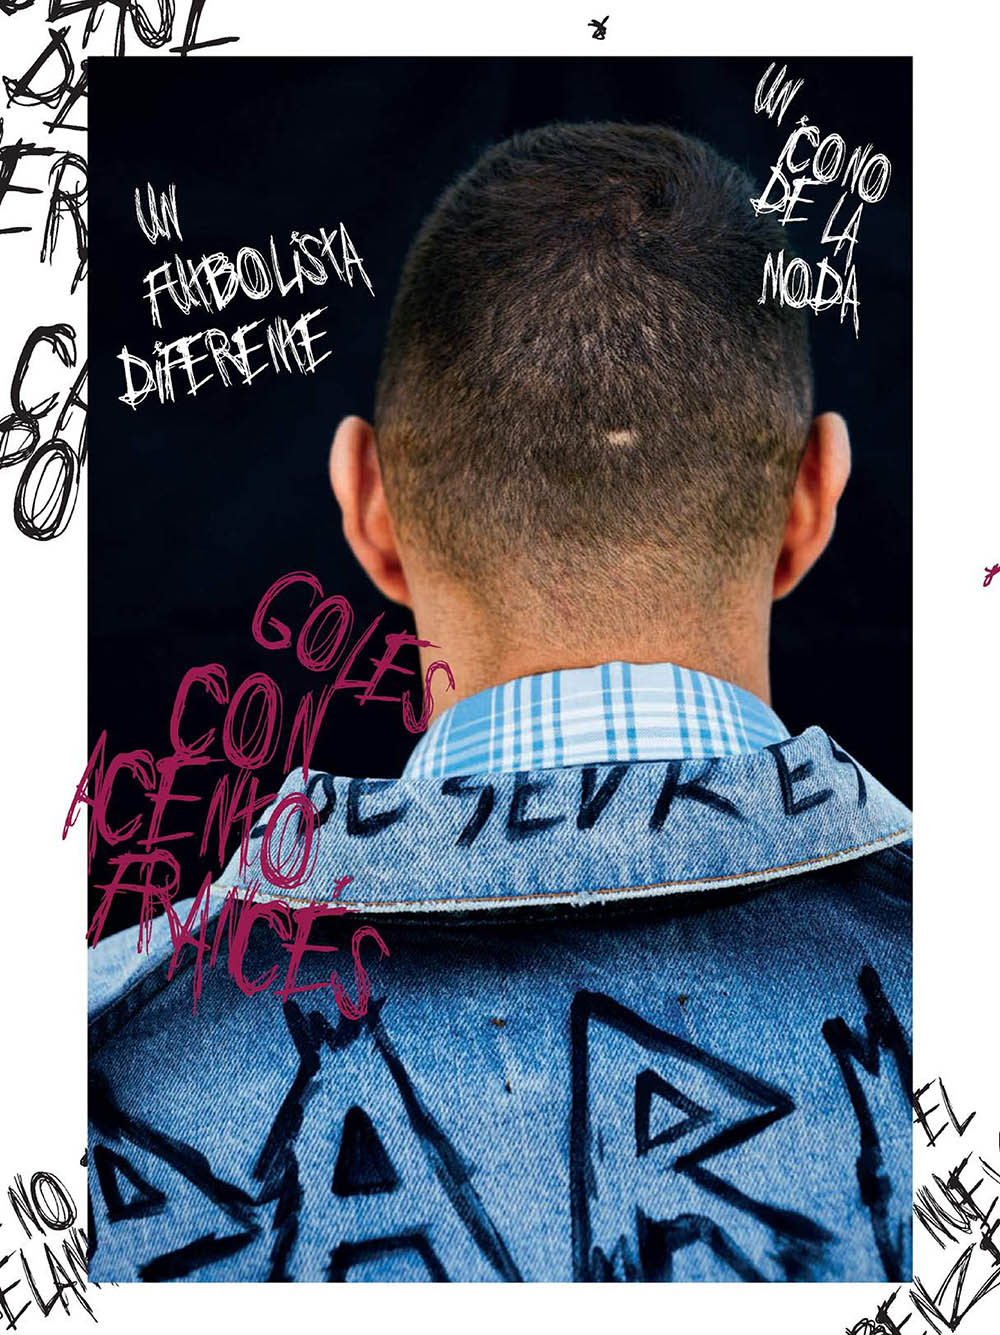 Karim Benzema covers GQ Spain May 2019 by Adria Canameras